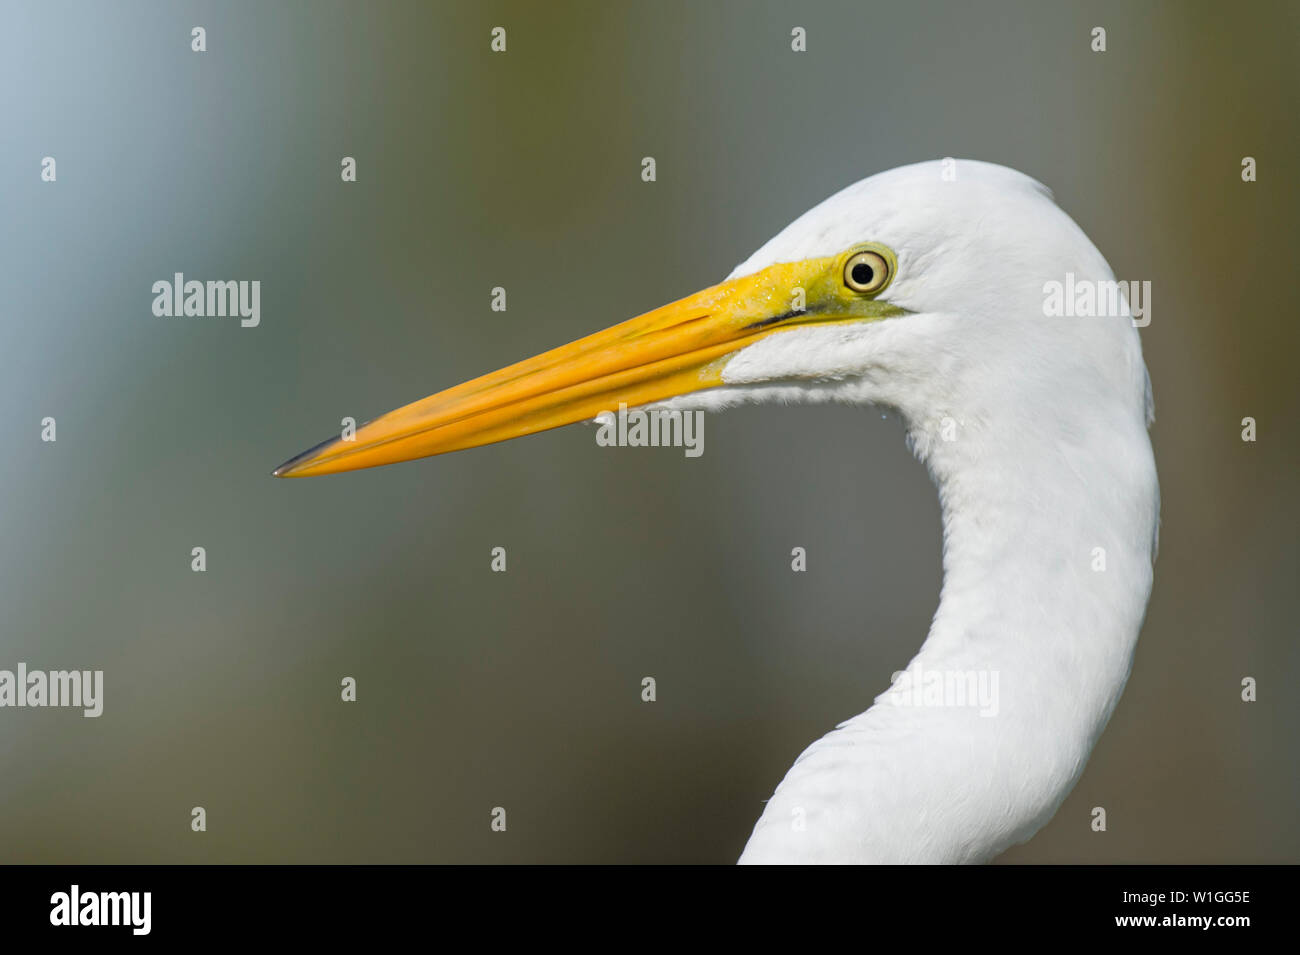 A white colored Great Egret close-up portrait with its large yellow bill with a smooth background in the bright sun. Stock Photo